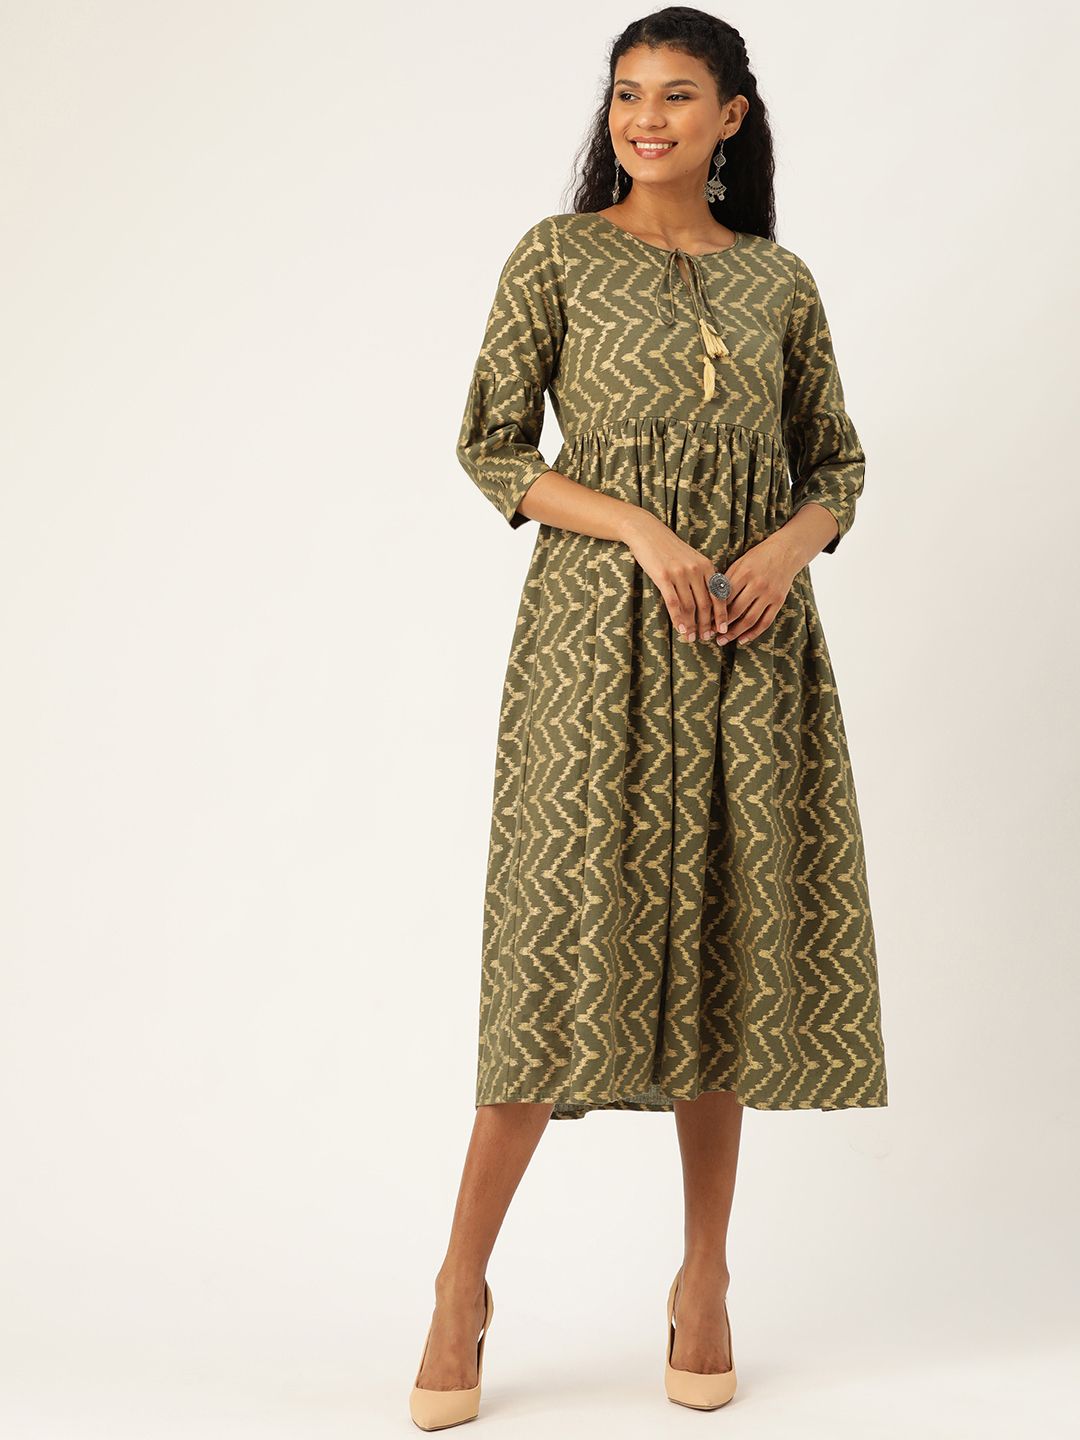 Shae by SASSAFRAS Women Olive Green & Golden Chevron Printed A-Line Dress Price in India